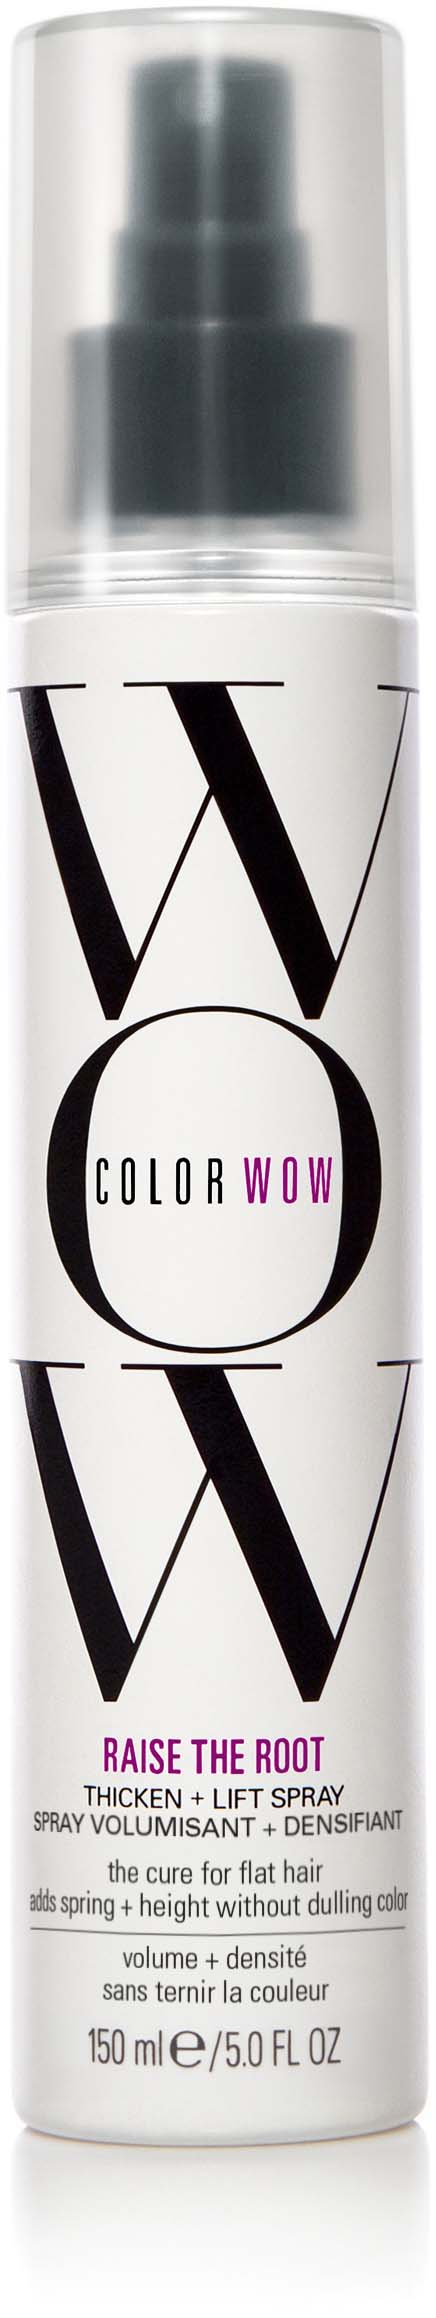 ColorWow Raise The Roots Spray 150ml